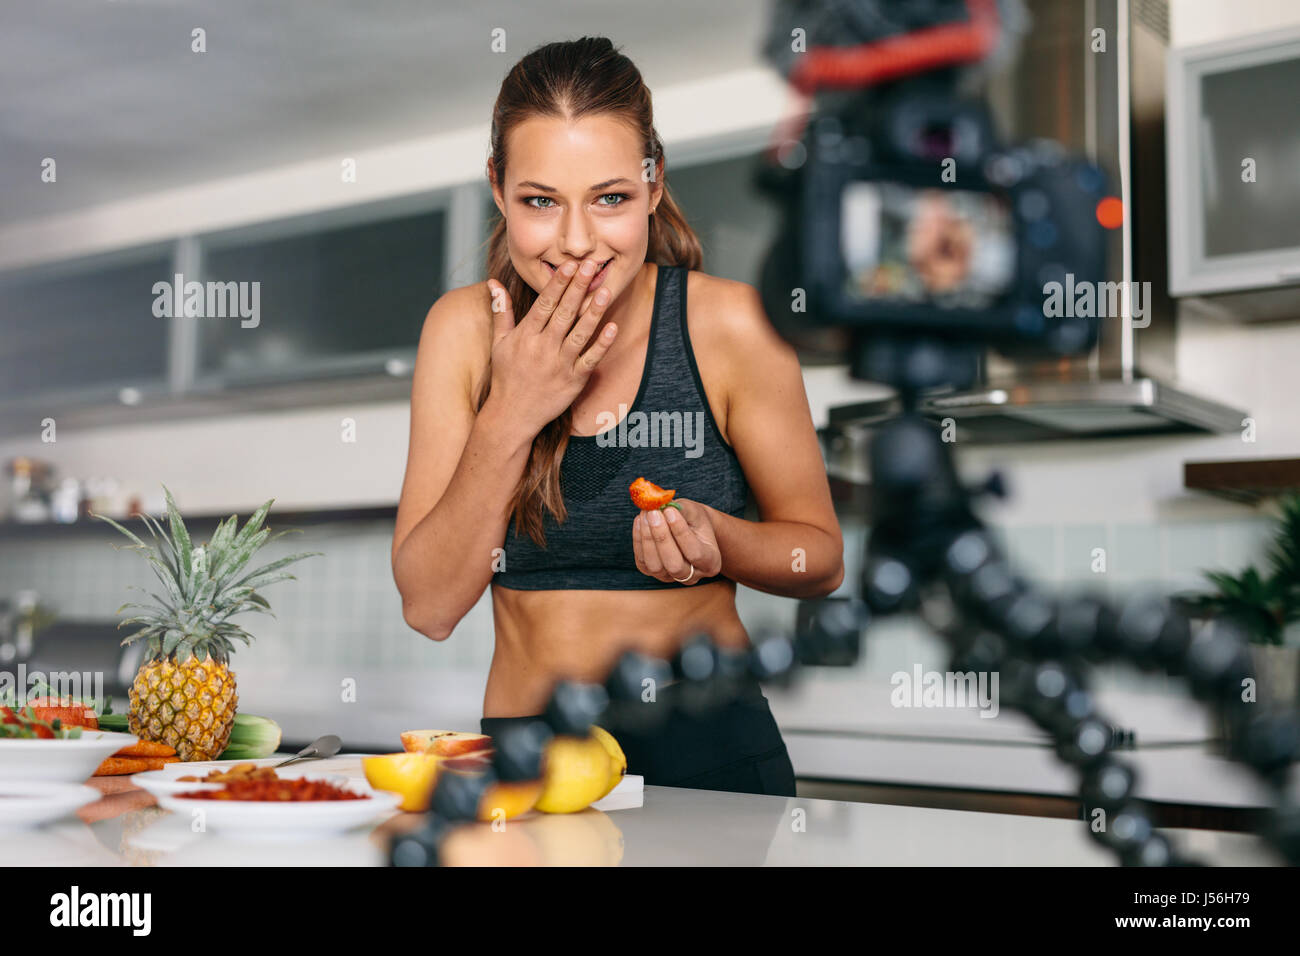 Young lady eating a strawberry at the kitchen table facing the camera. Smiling woman recording content for her vlog in kitchen. Stock Photo